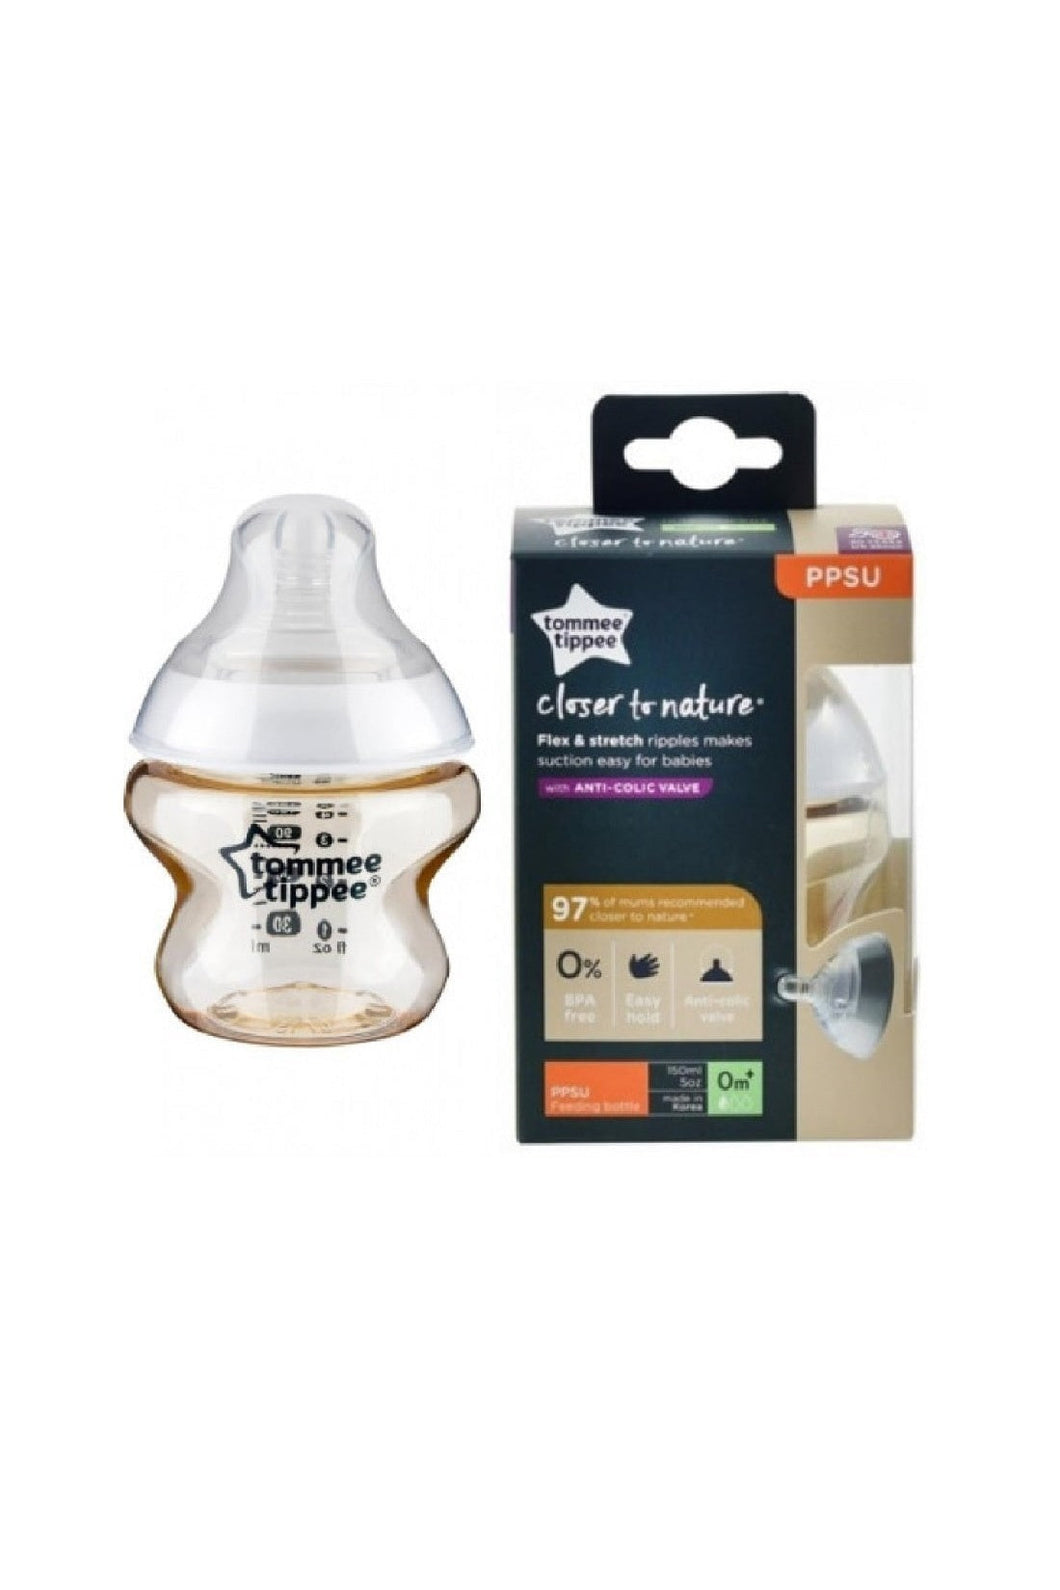 Tommee Tippee Closer To Nature Ppsu Milk Bottle 150Ml